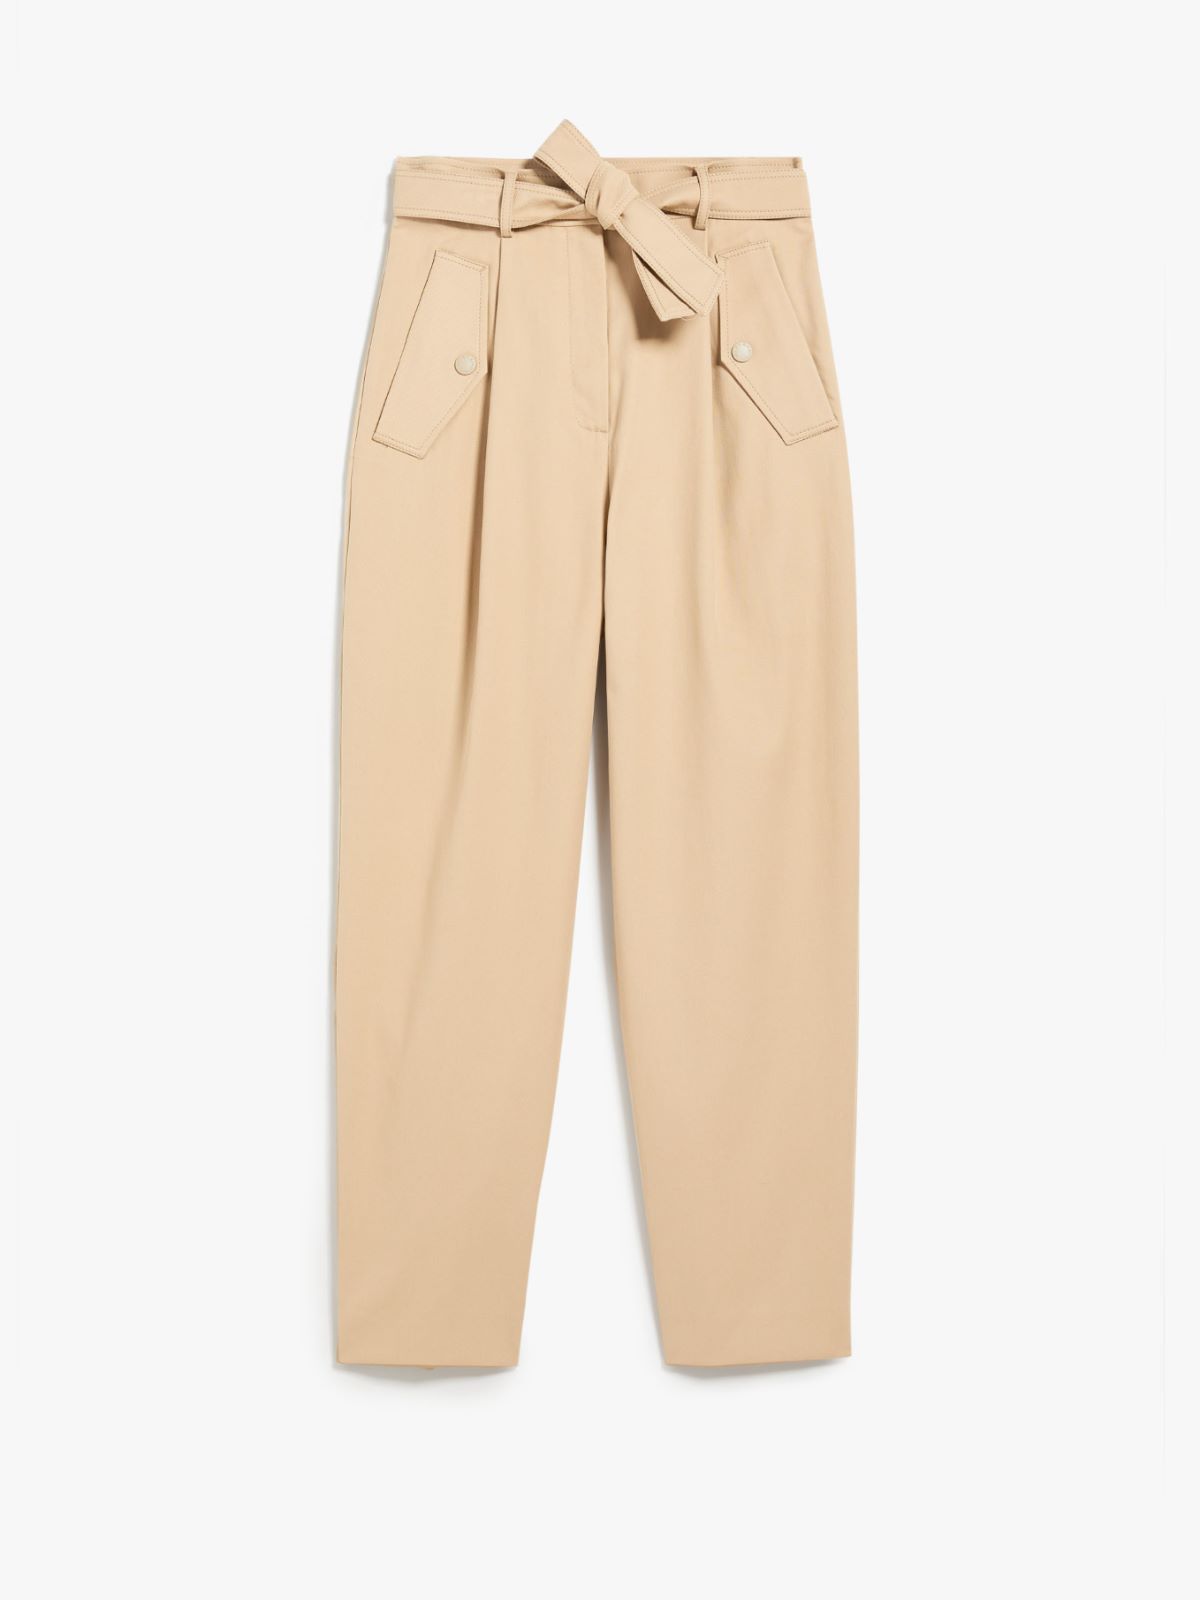 Stradivarius Carrot Fit Trousers with Zip detail | Killer Fashion